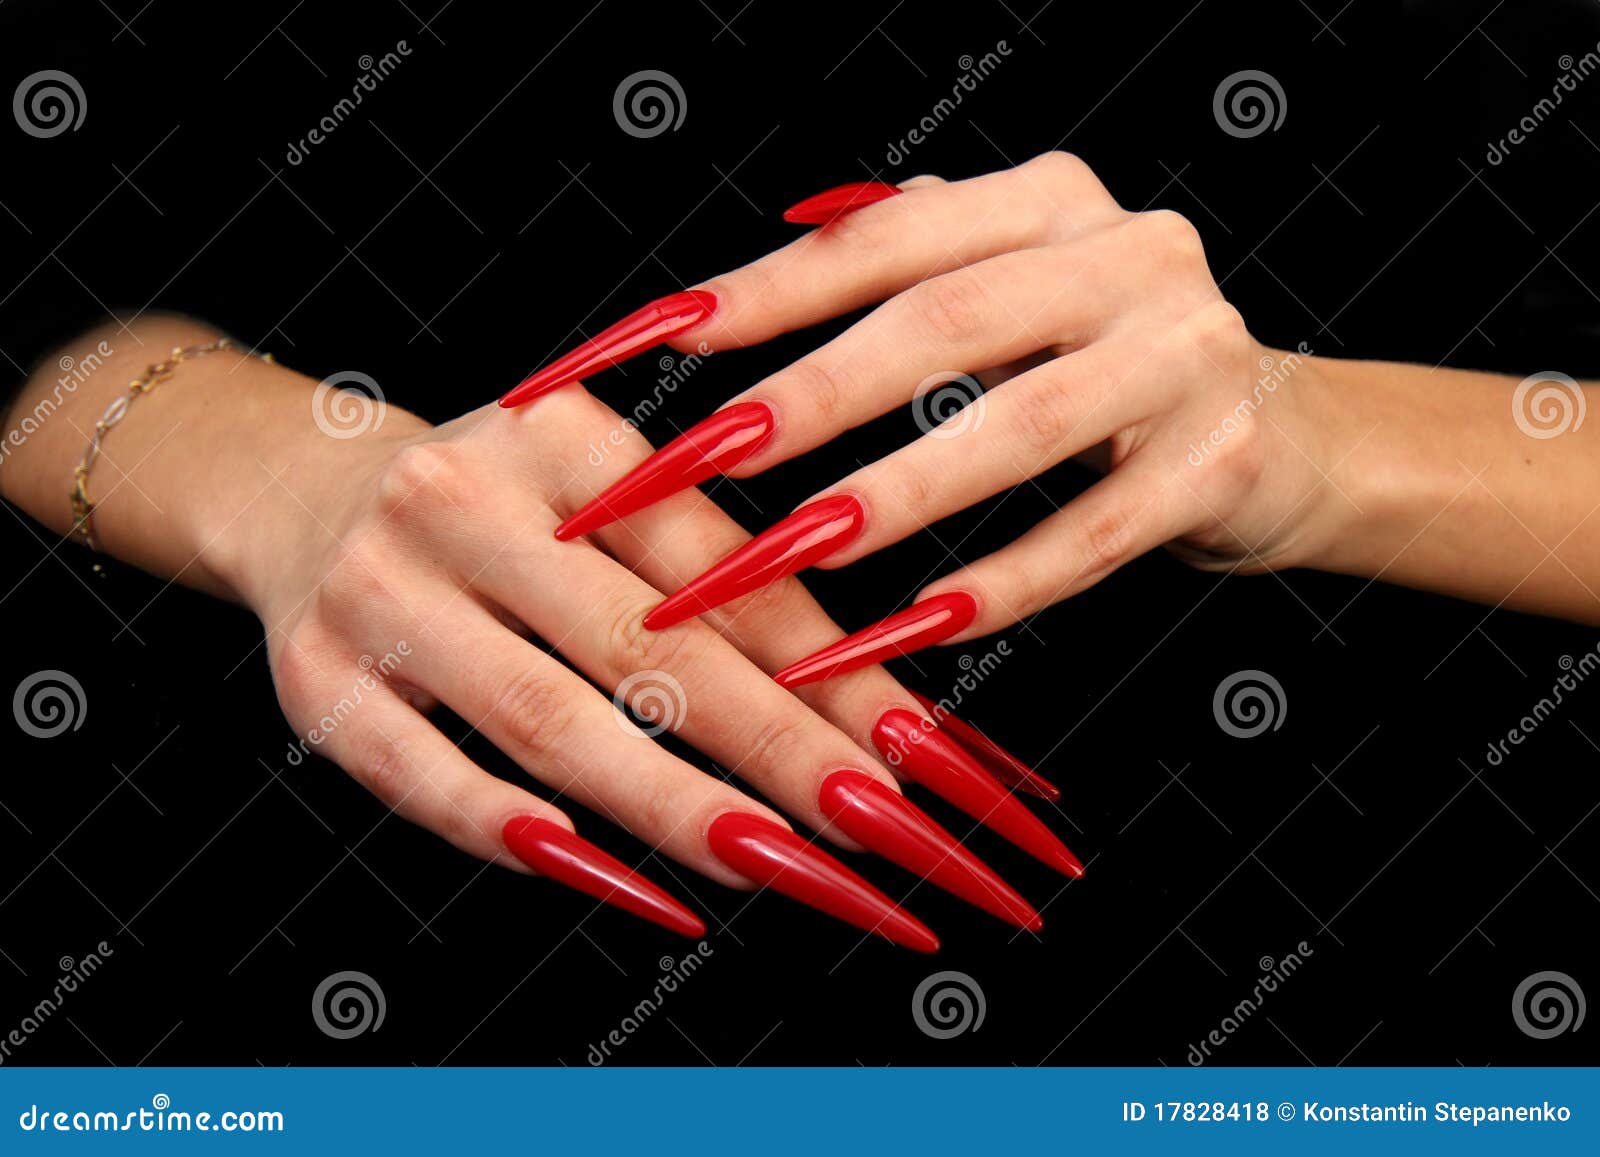 Amazon.com: Dzrige Halloween Finger Tips,Scary Long Finger Claws,Horror Long  Vampire Nails,Witch Finger Nails for Halloween Cosplay Makeup Prop  Accessories April Fool's Day Joke Toys Prank Gifts,Red (10Pcs) : Toys &  Games